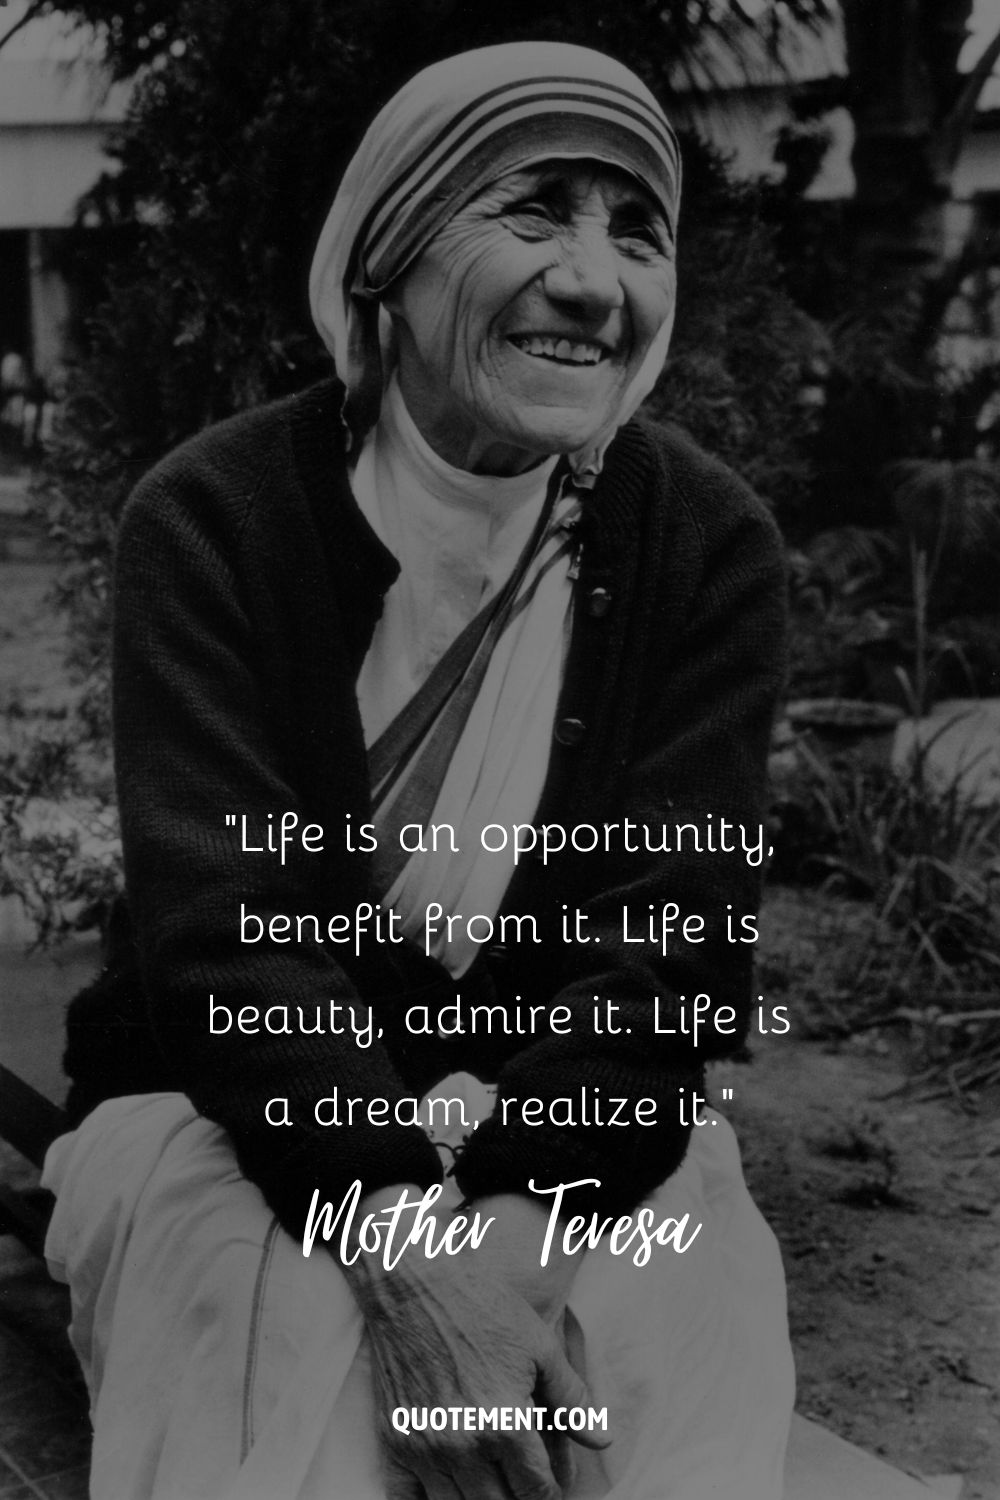 Mother Teresa sitting outdoors and smiling representing an inspiring Mother Teresa quote
